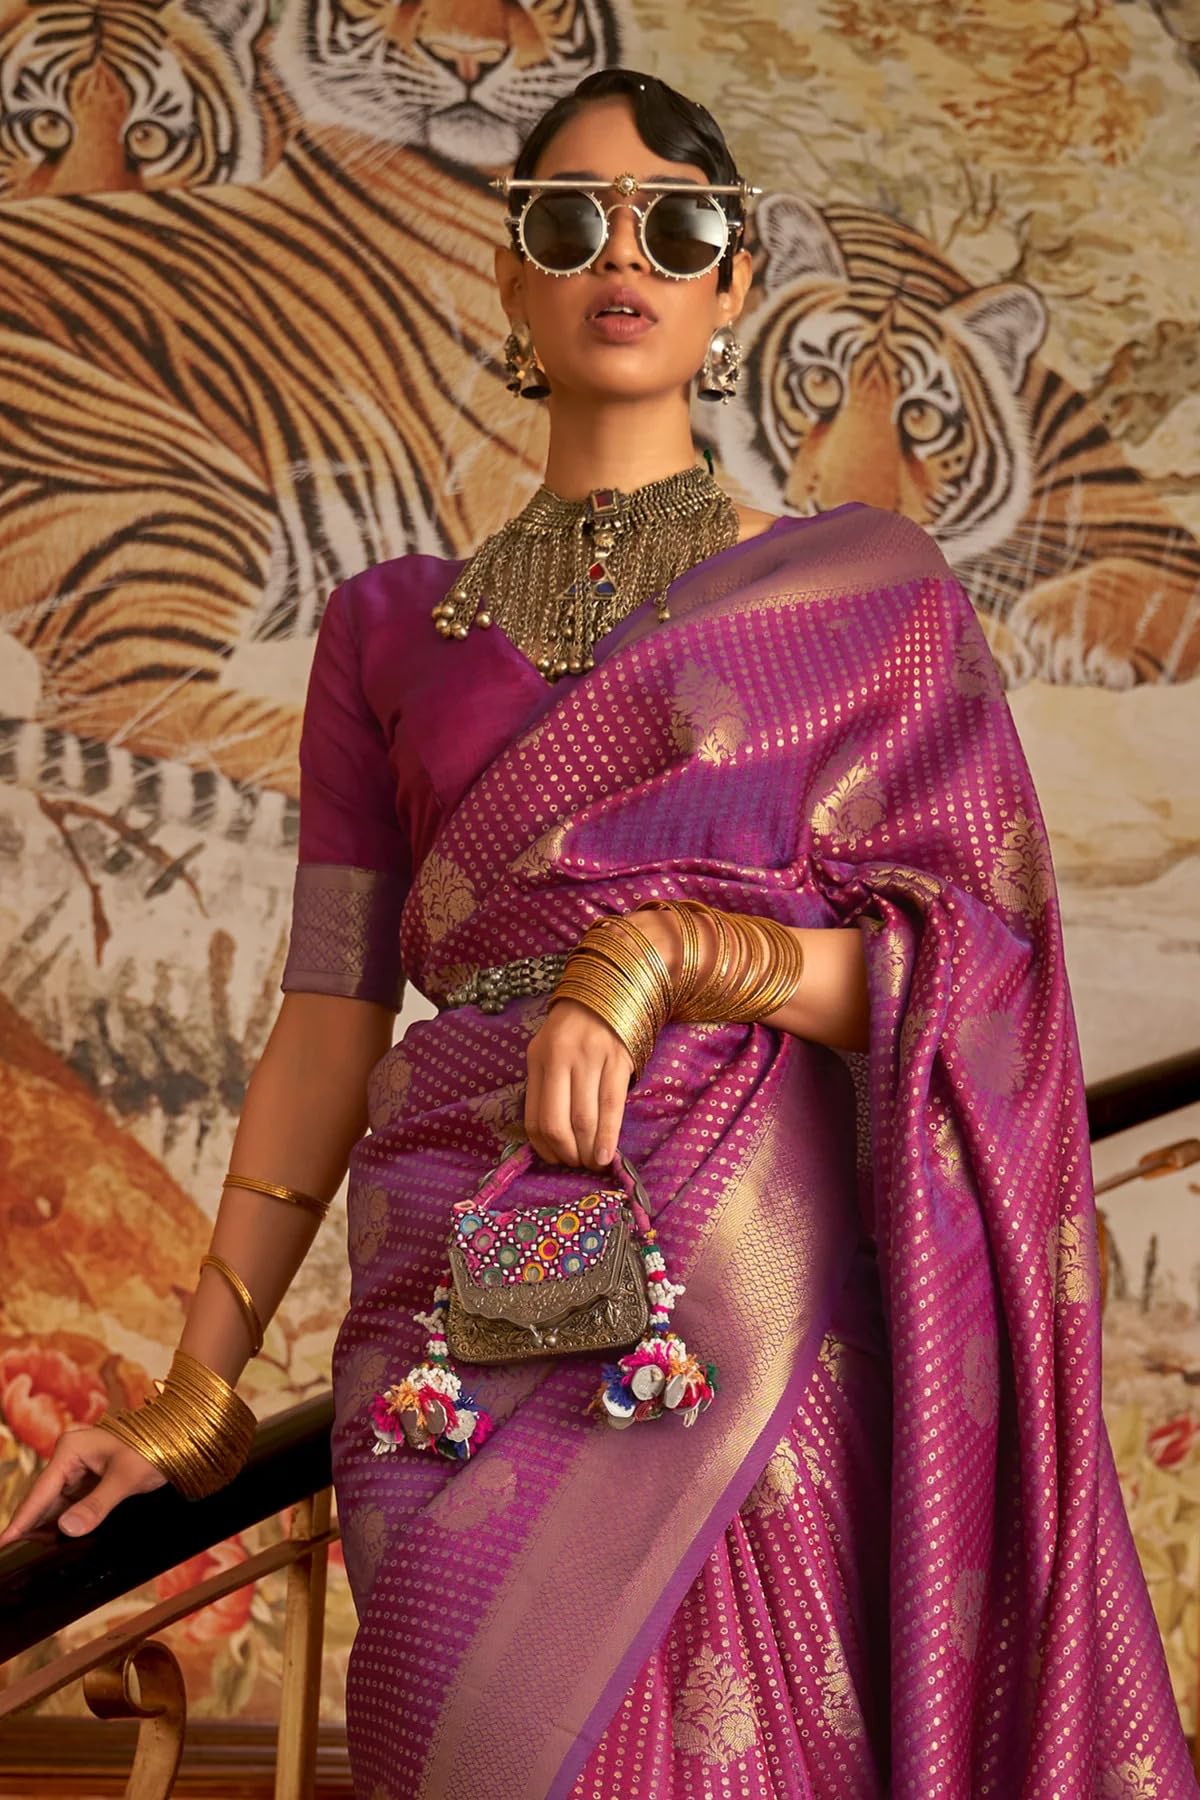 Shop Abharana's Signature Collection: Organic Silk Sarees in Olive Green, Pastel Pink, and Deep Magenta